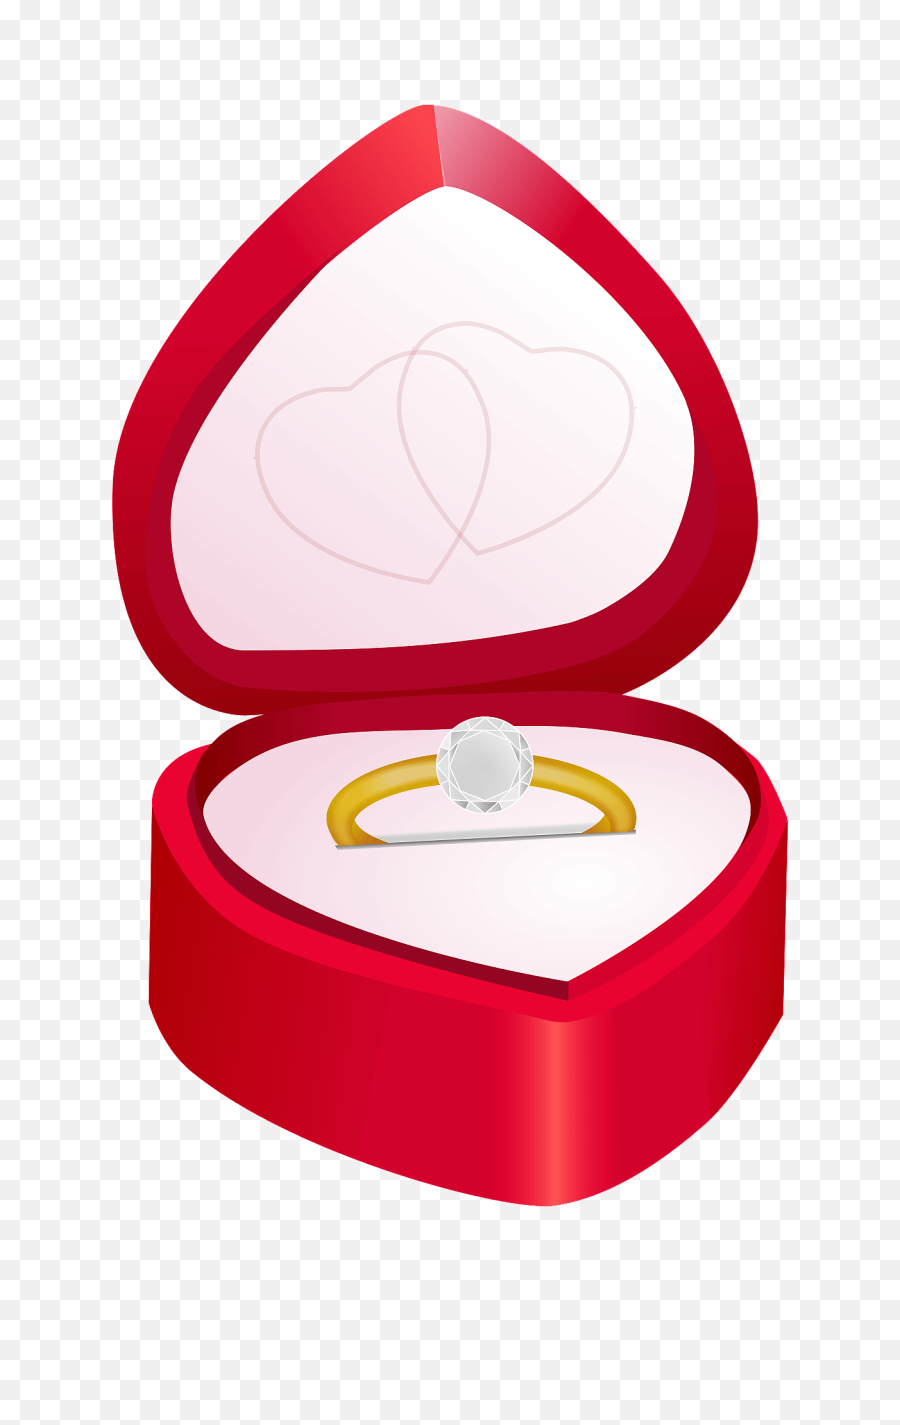 Circle Engagement Ring Png Clipart - Wedding Ring Cartoon Ring,Wedding Ring Clipart Png